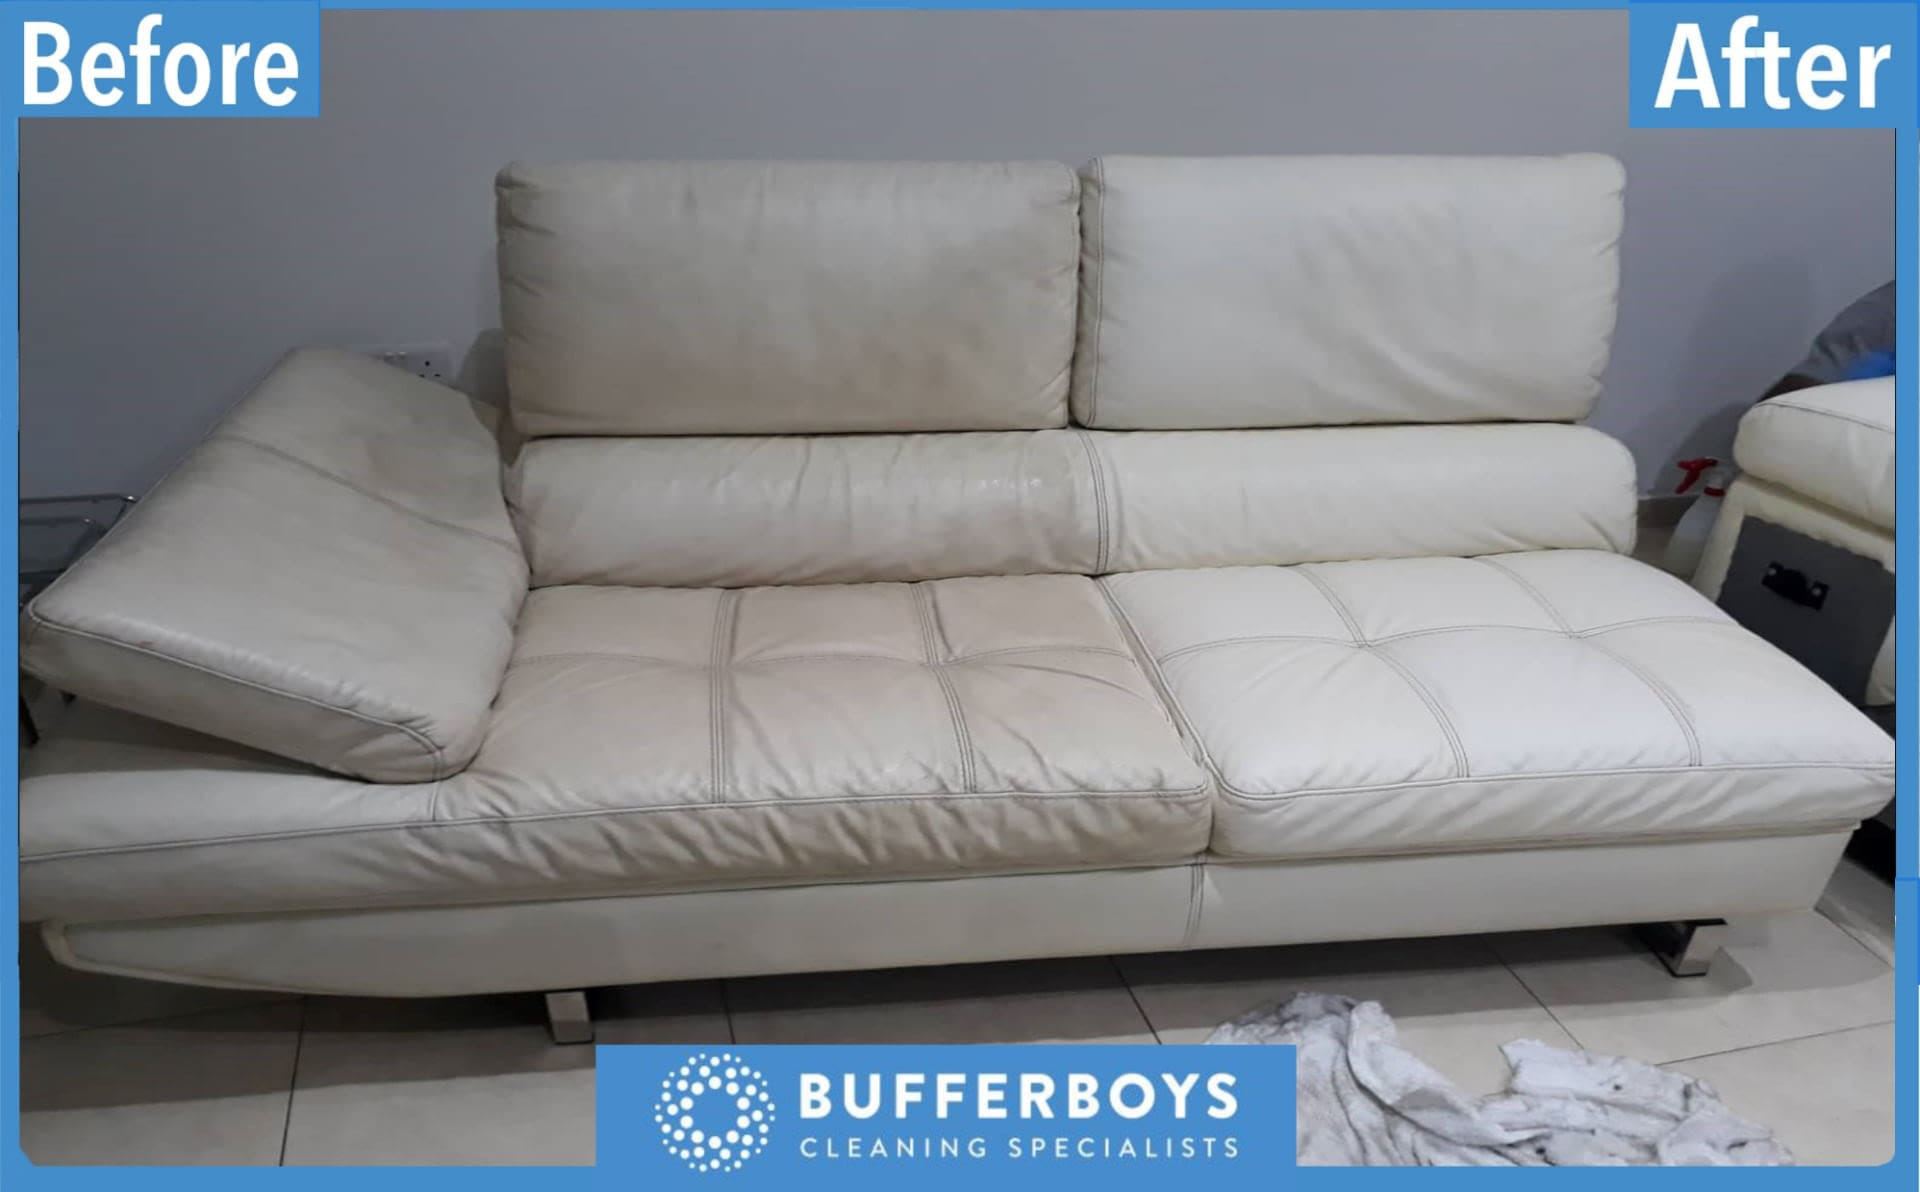 BUFFERBOYS - Carpet & Upholstery Cleaners